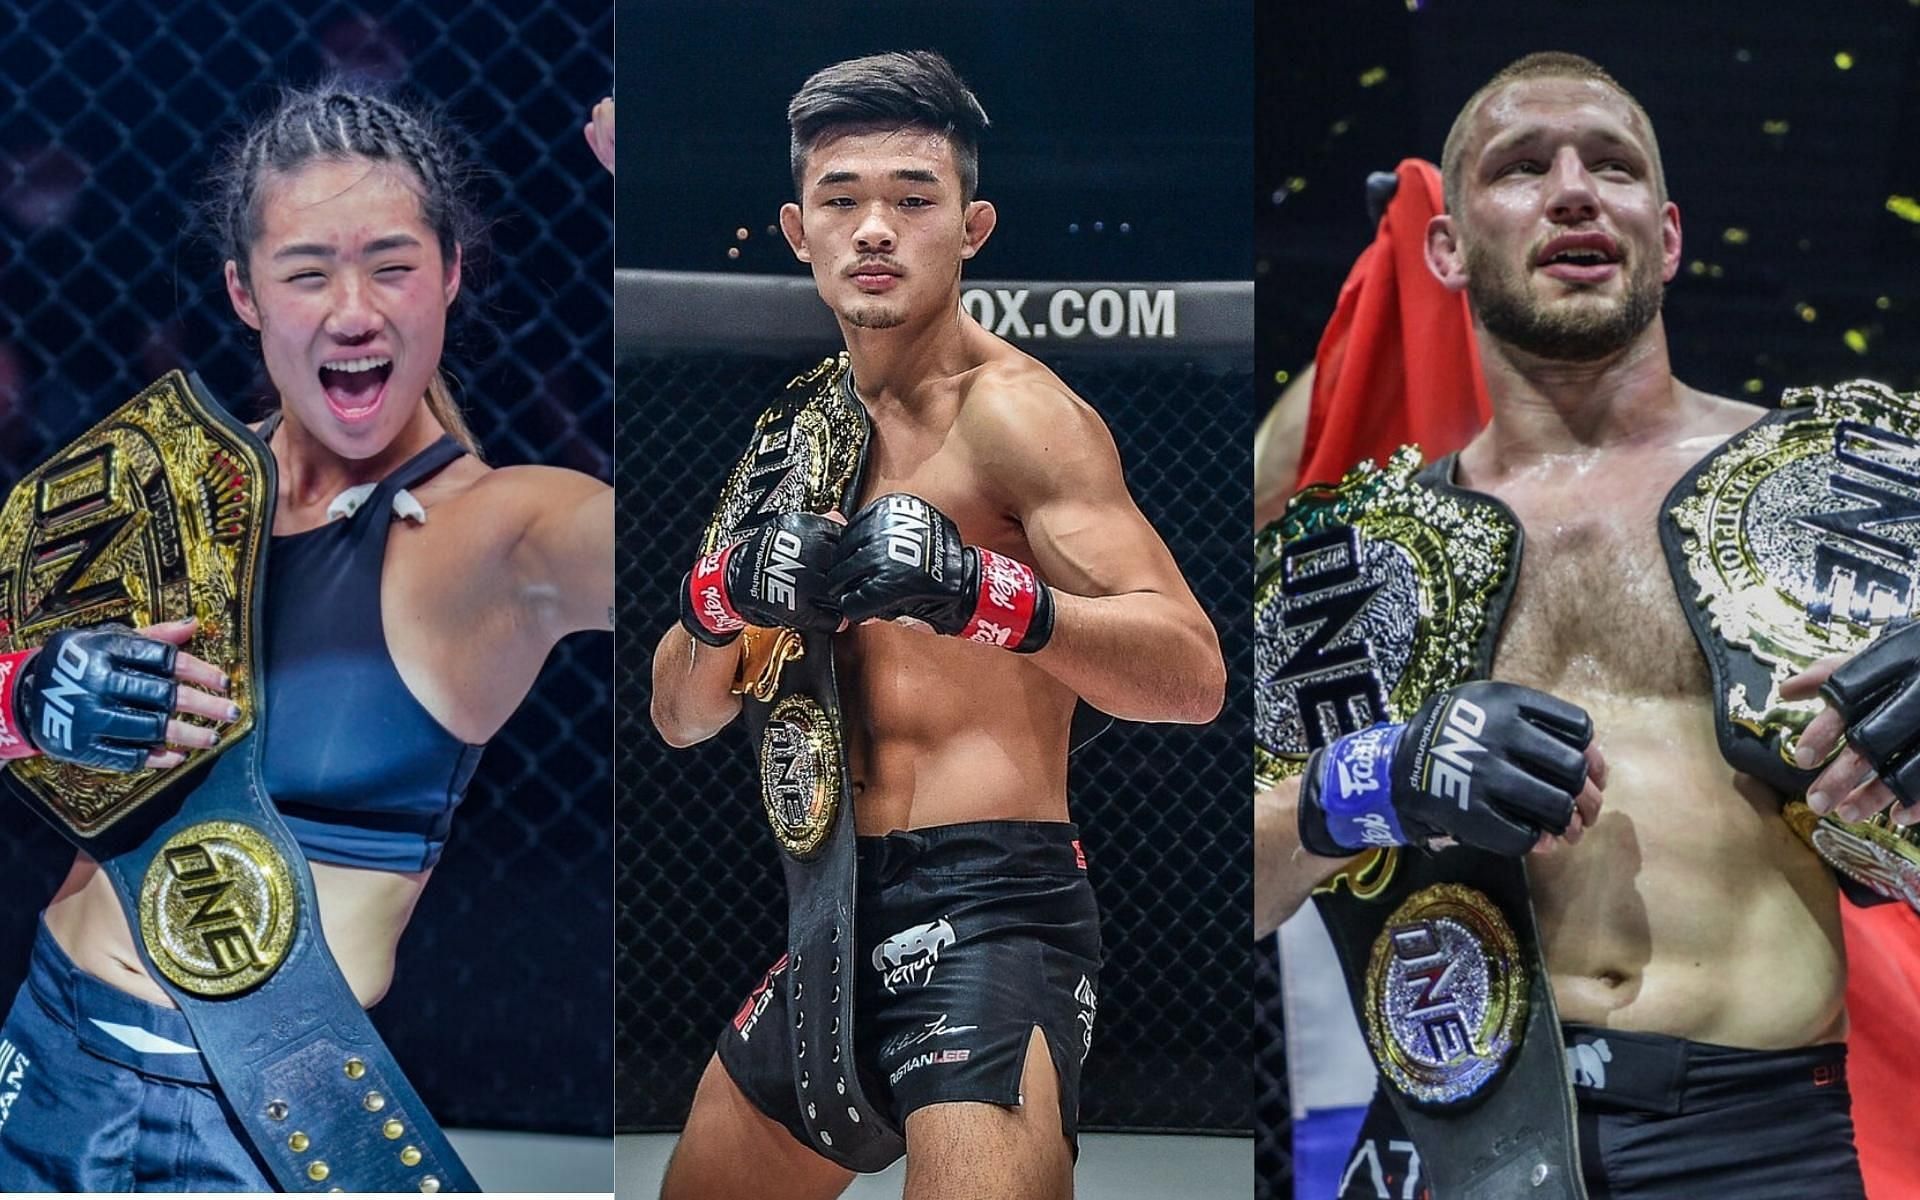 Former ONE lightweight world champion Christian Lee (middle) named his sister Angela Lee (left) and Reinier de Ridder (right) as the two ONE Championship fighters who impressed him the most this year. (Images courtesy of ONE Championship)